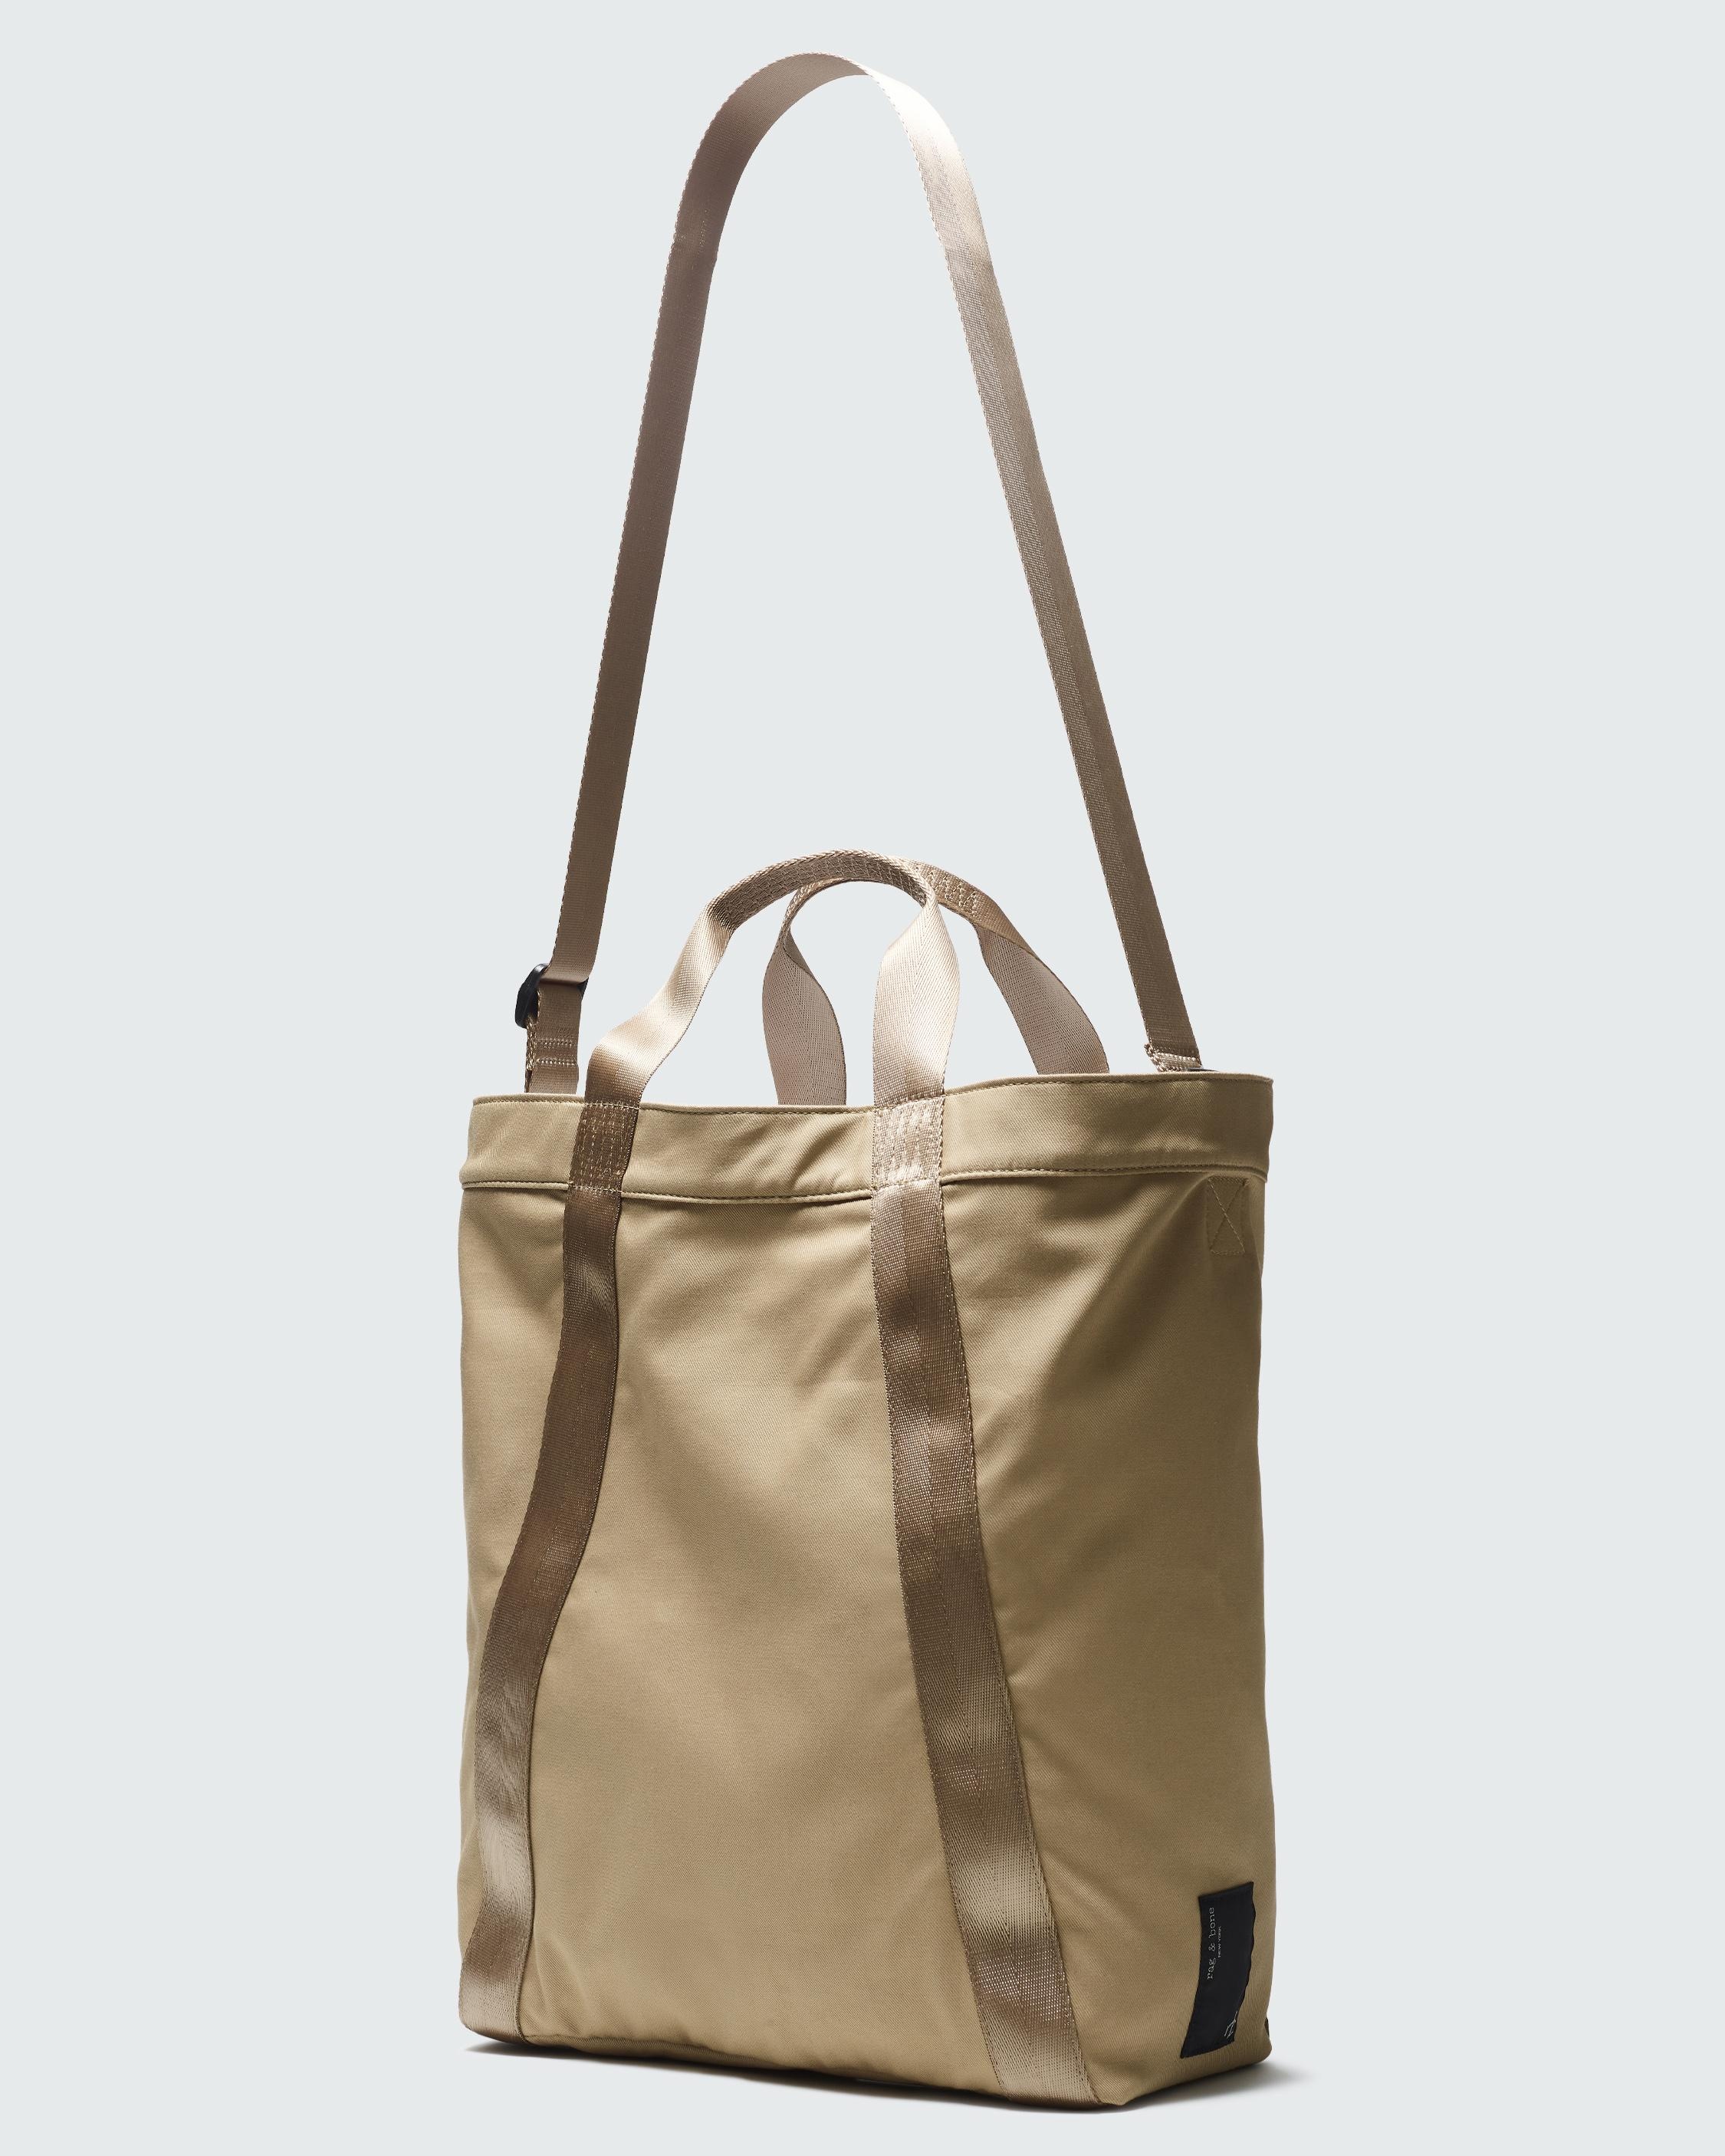 Division Tote - Cotton
Large Tote Bag - 4